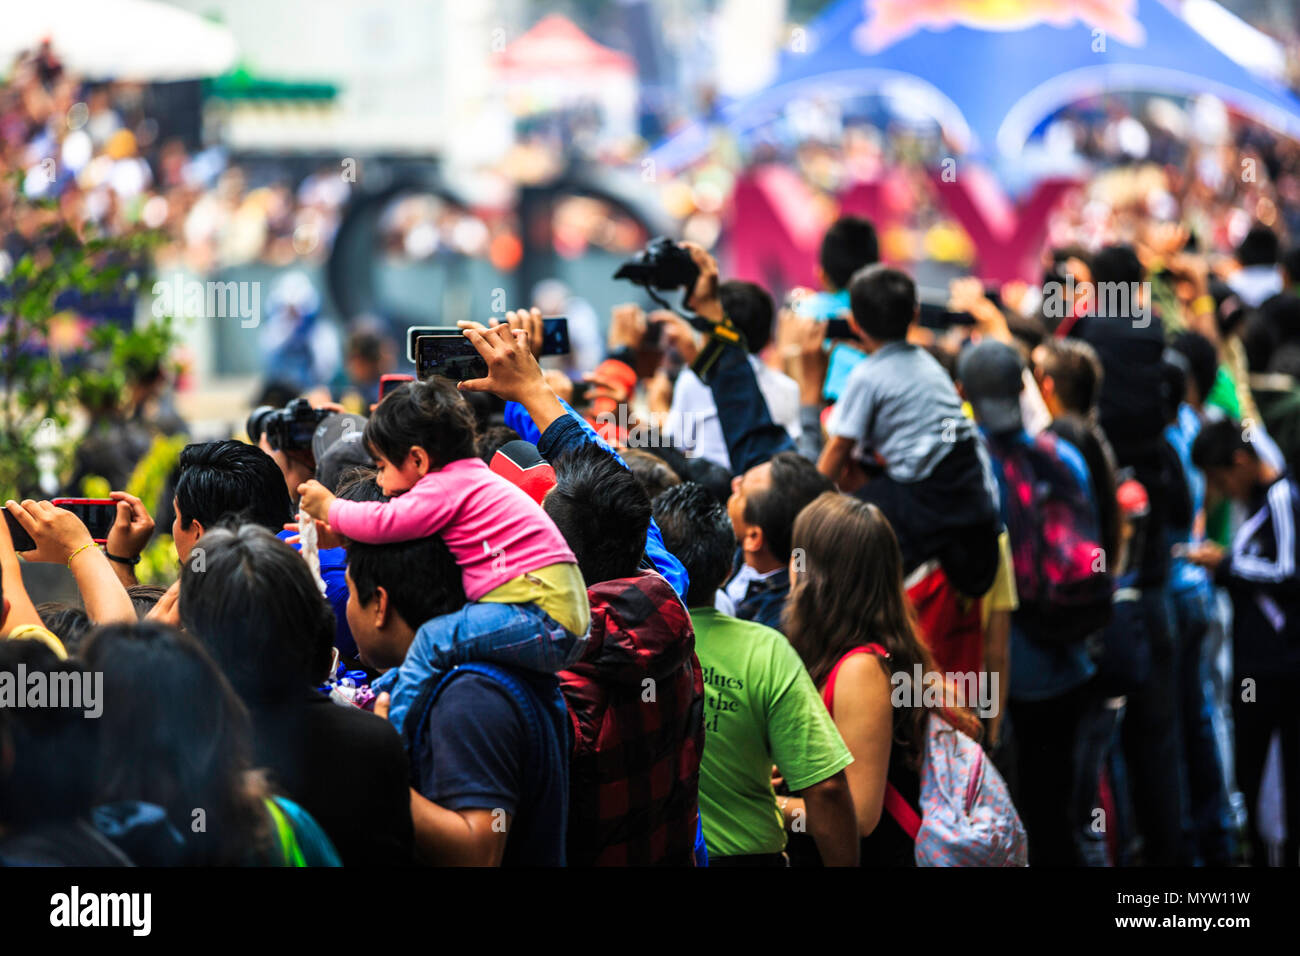 Mexico City, Mexico - June 27, 2015: Audience taking pictures and video of the event, at the Infiniti Red Bull Racing F1 Showrun. Stock Photo